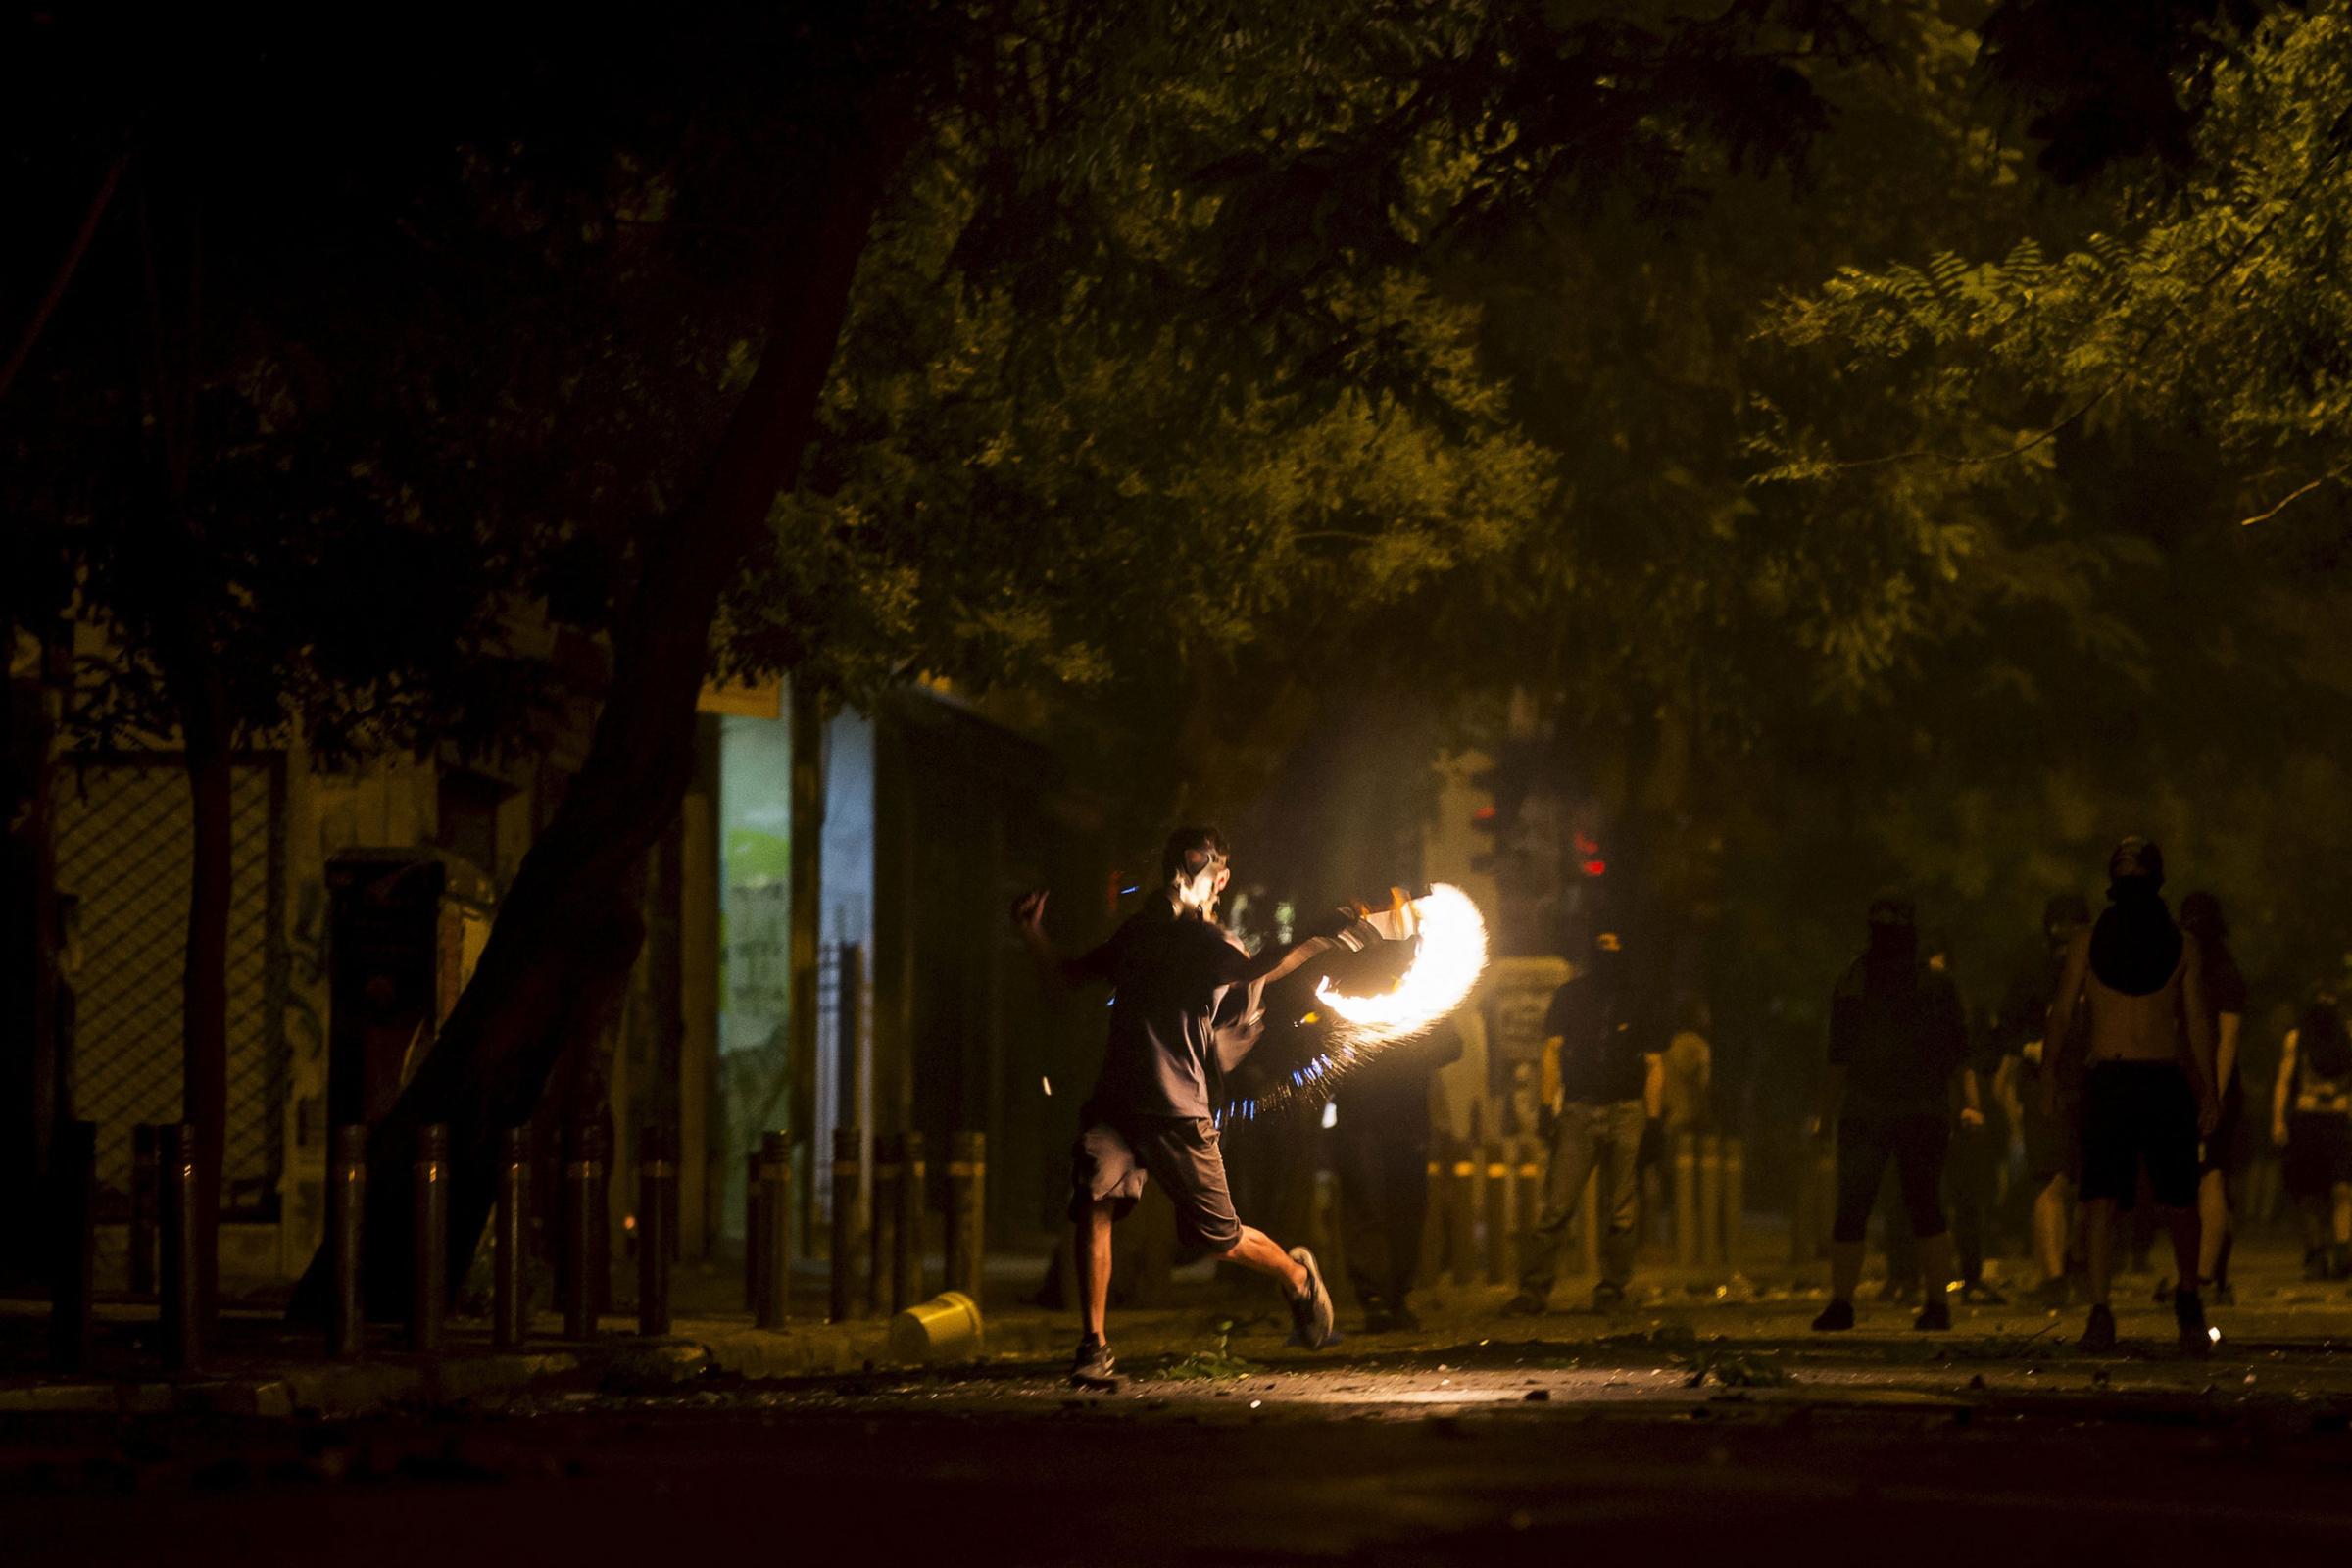 A masked youth throws a petrol bomb at riot police during minor clashes in central Athens, Greece July 5, 2015. Greeks voted overwhelmingly "No" on Sunday in a historic bailout referendum, partial results showed, defying warnings from across Europe that rejecting new austerity terms for fresh financial aid would set their country on a path out of the euro. REUTERS/Marko Djurica